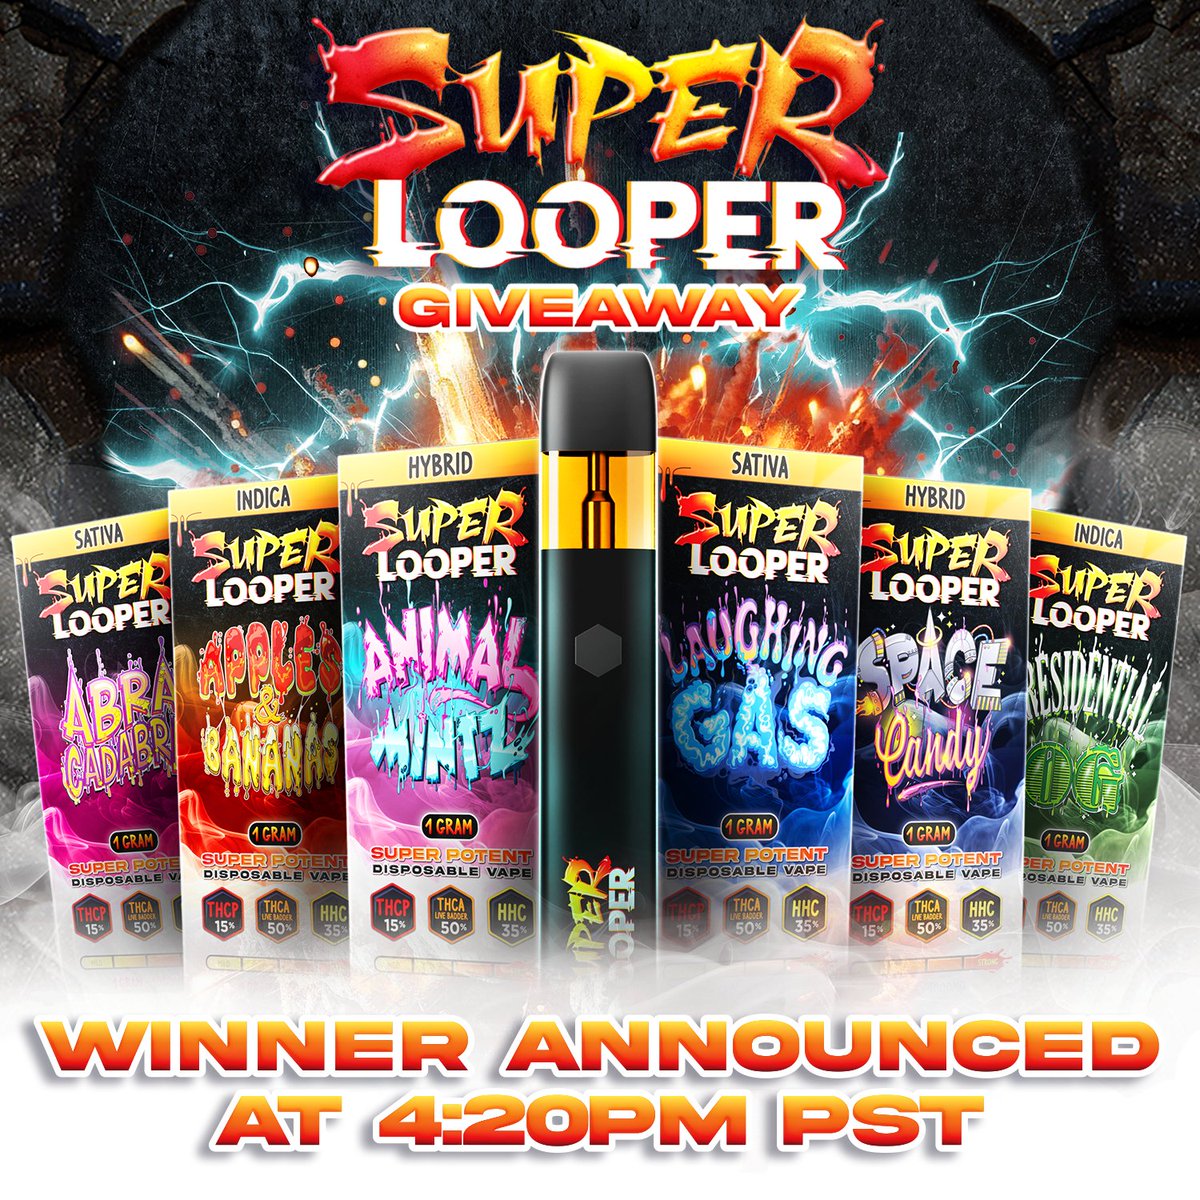 Super Looper Giveaway! Now's your chance to try one of our strongest blends! Rules: ✅Follow this account ✅Like this post ✅Quote tweet which flavor you want to try ✅Comment and tag three friends Good luck, Looper Fam!